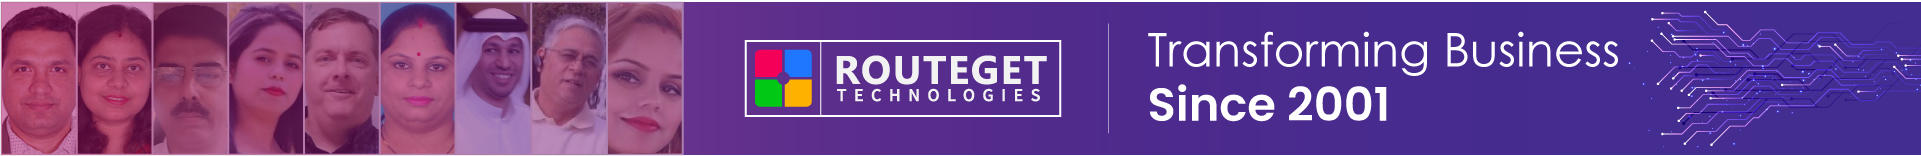 Routeget Technologies Footer